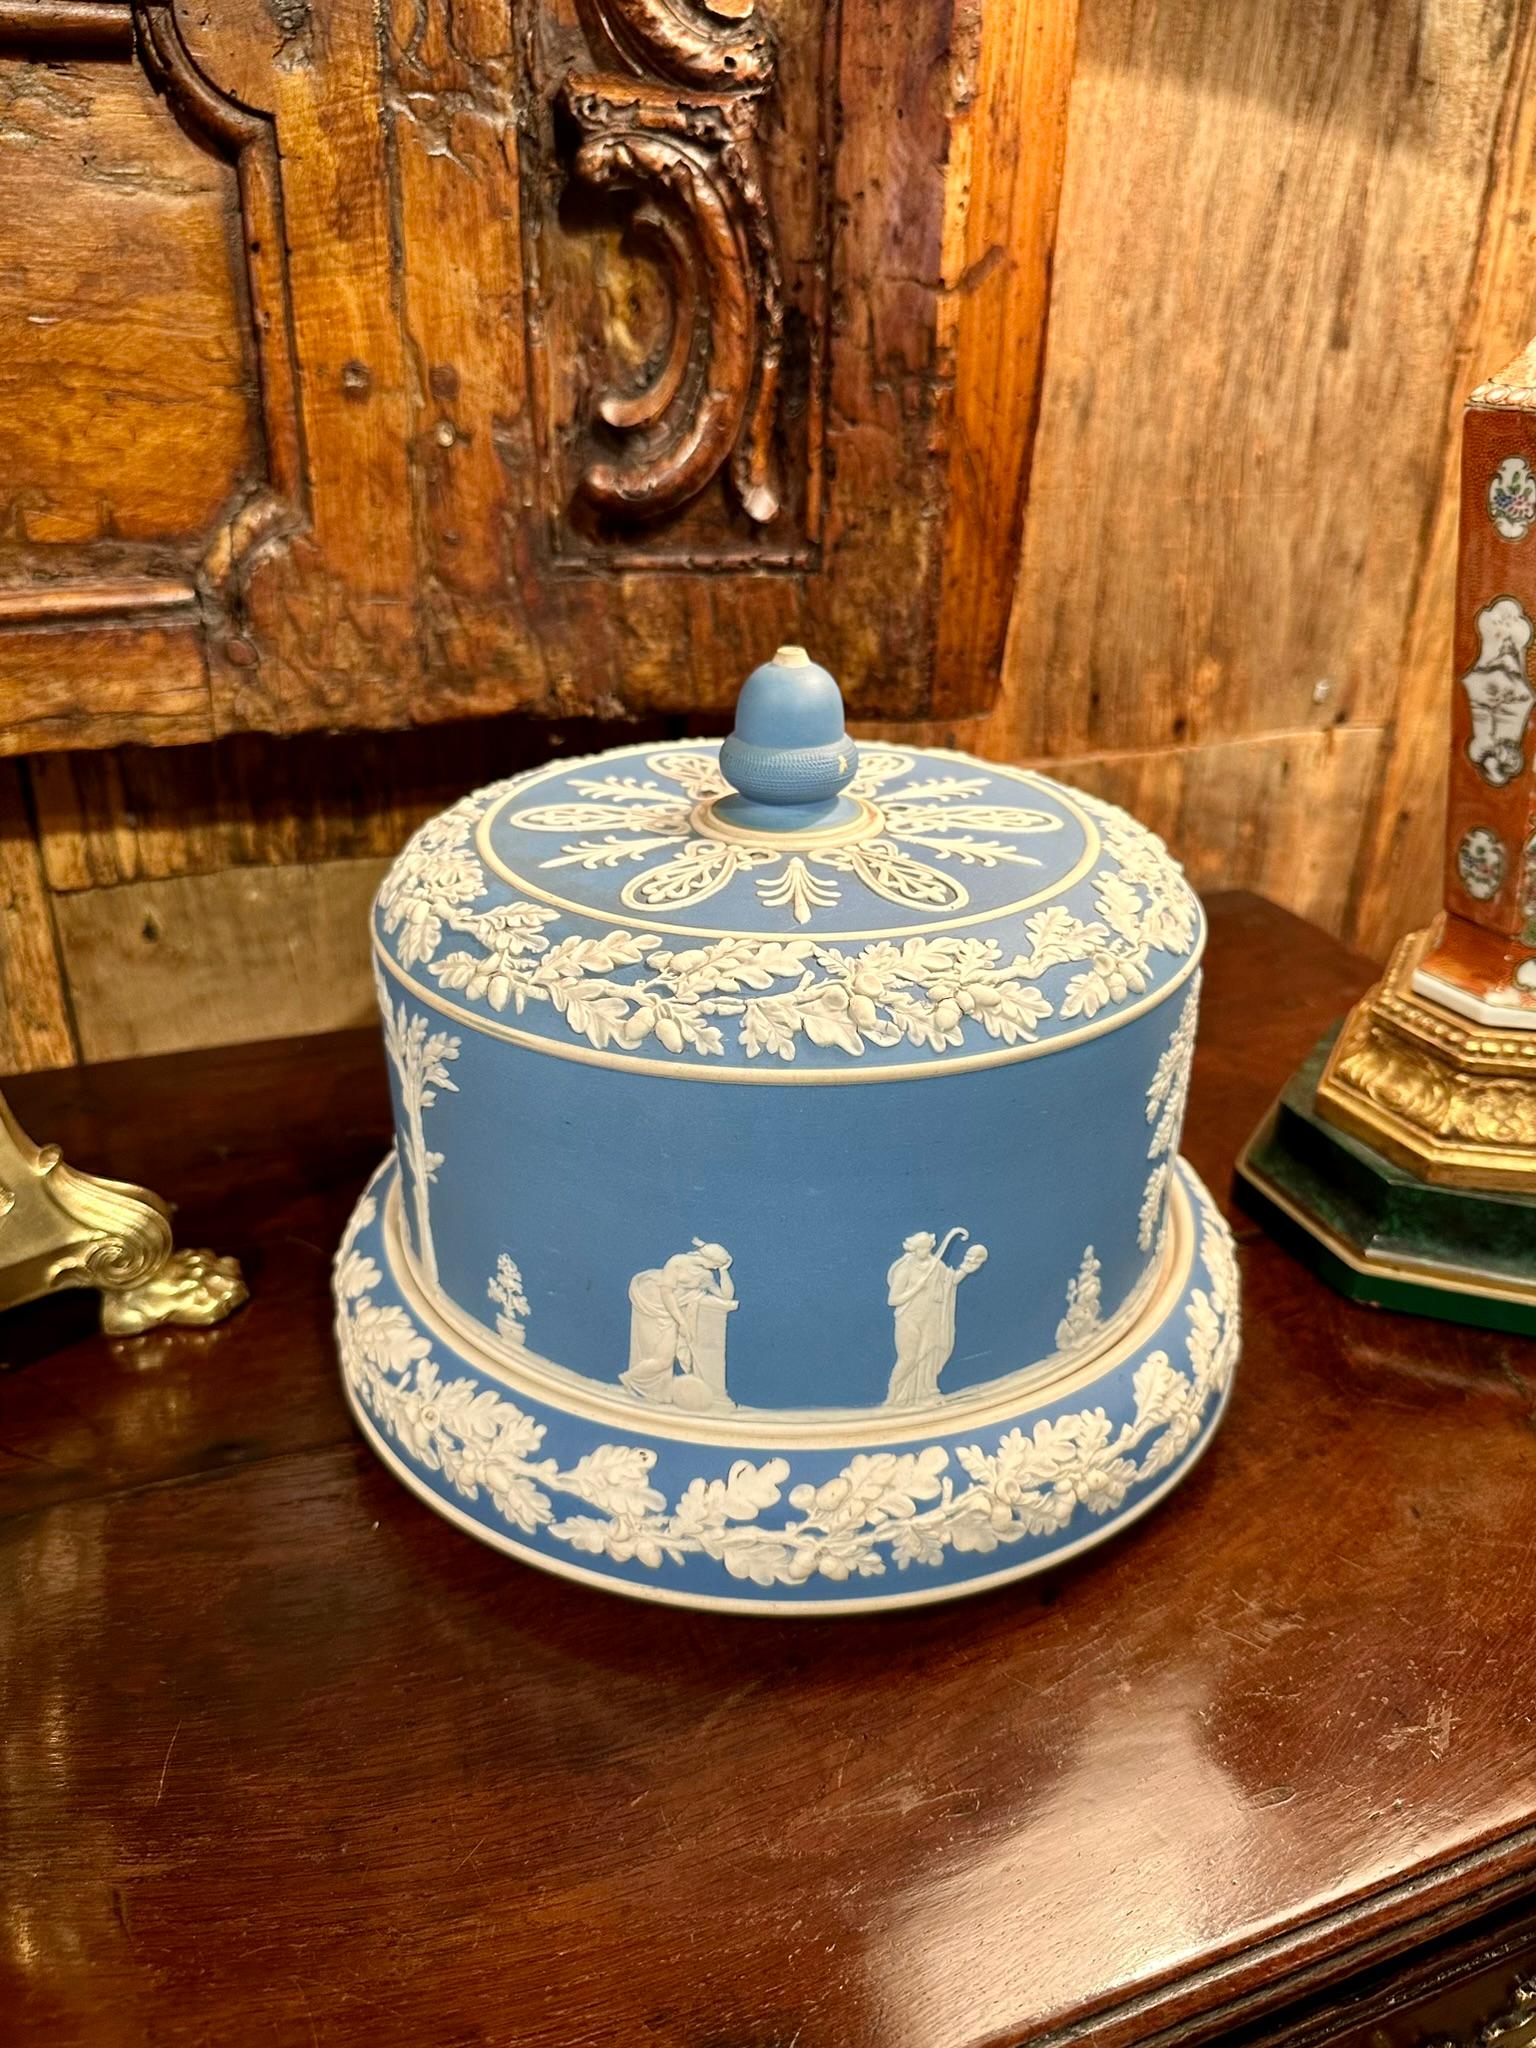 Antique English Wedgwood Jasperware Porcelain Cheese Dome & Cover, Circa 1900. For Sale 2